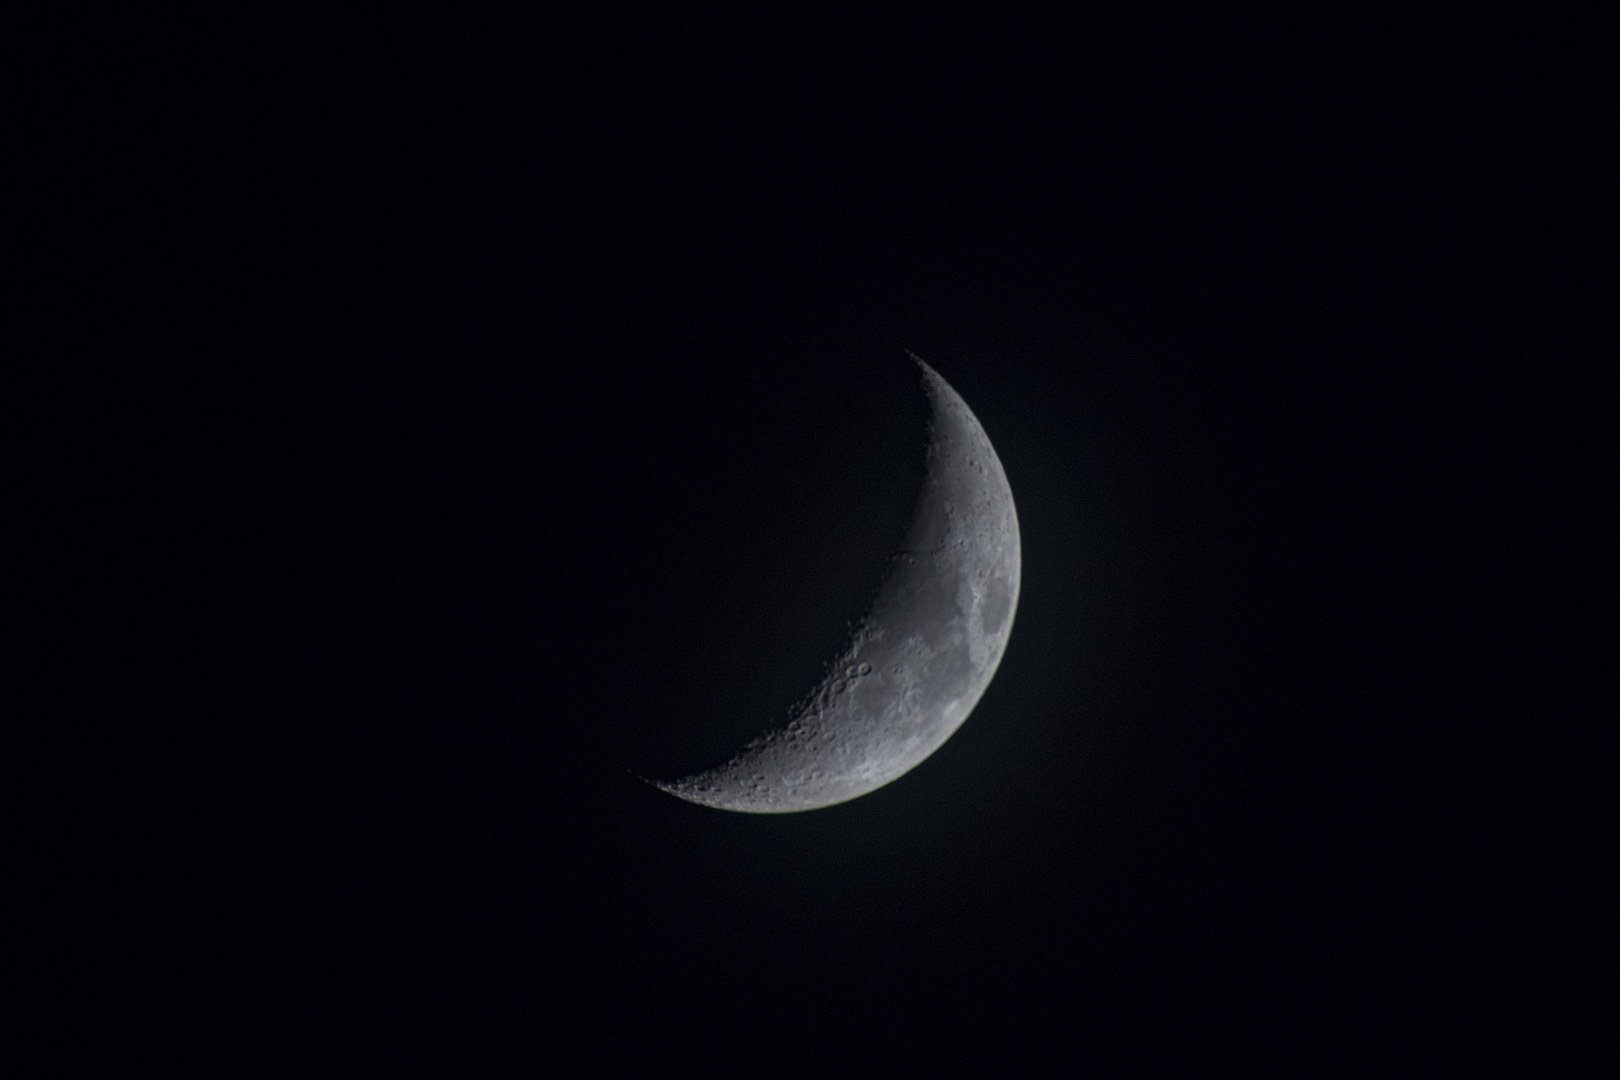 the moon today 28.4.2020